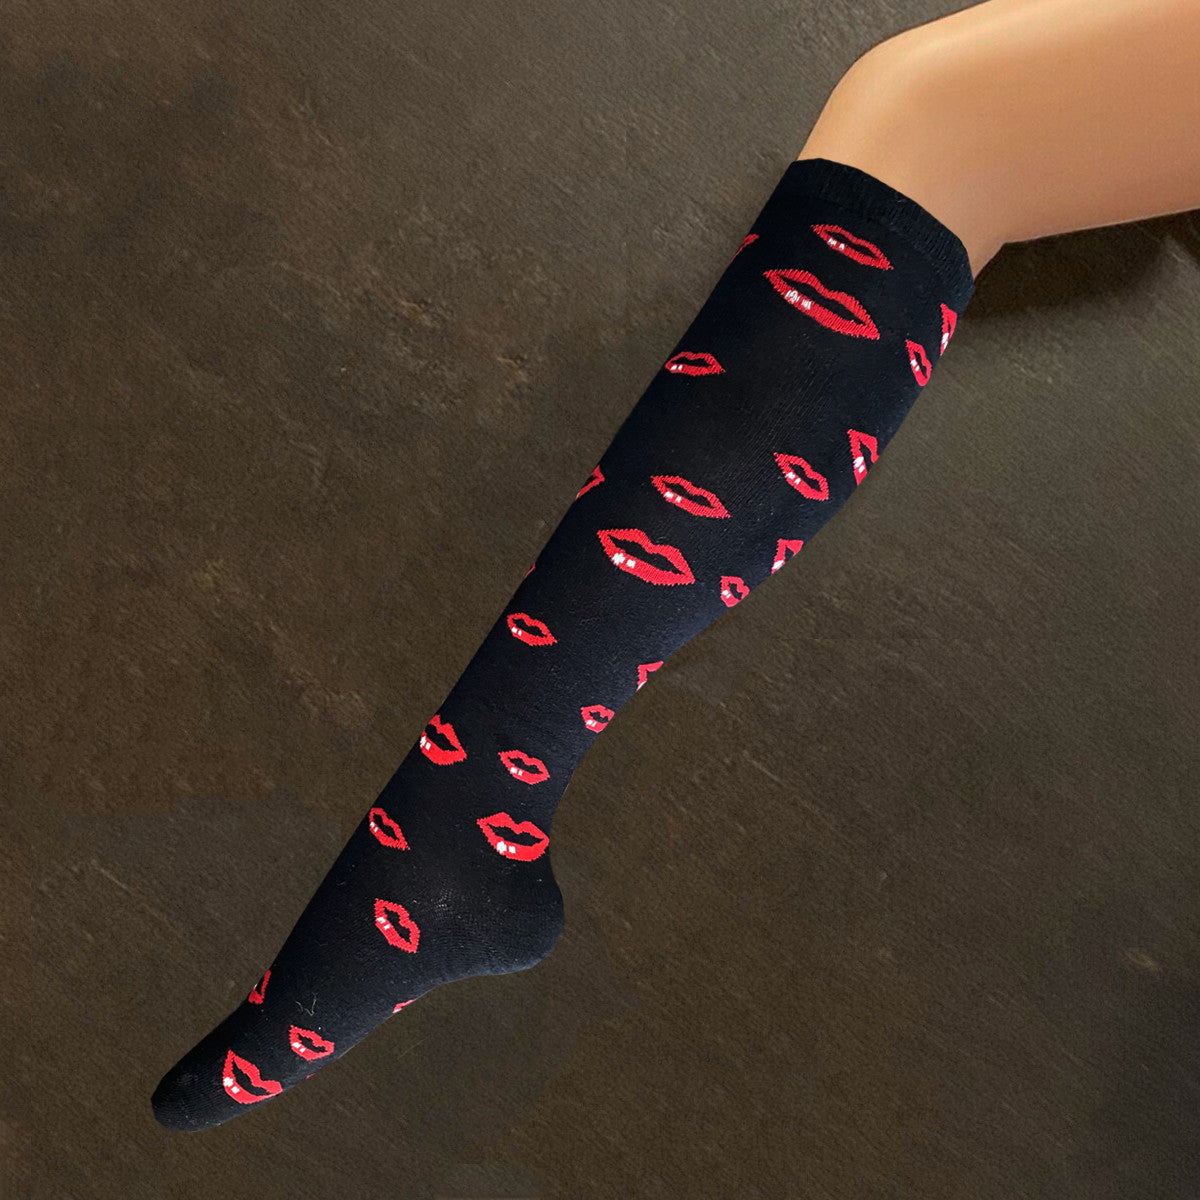 Socks - Black with Red Lips